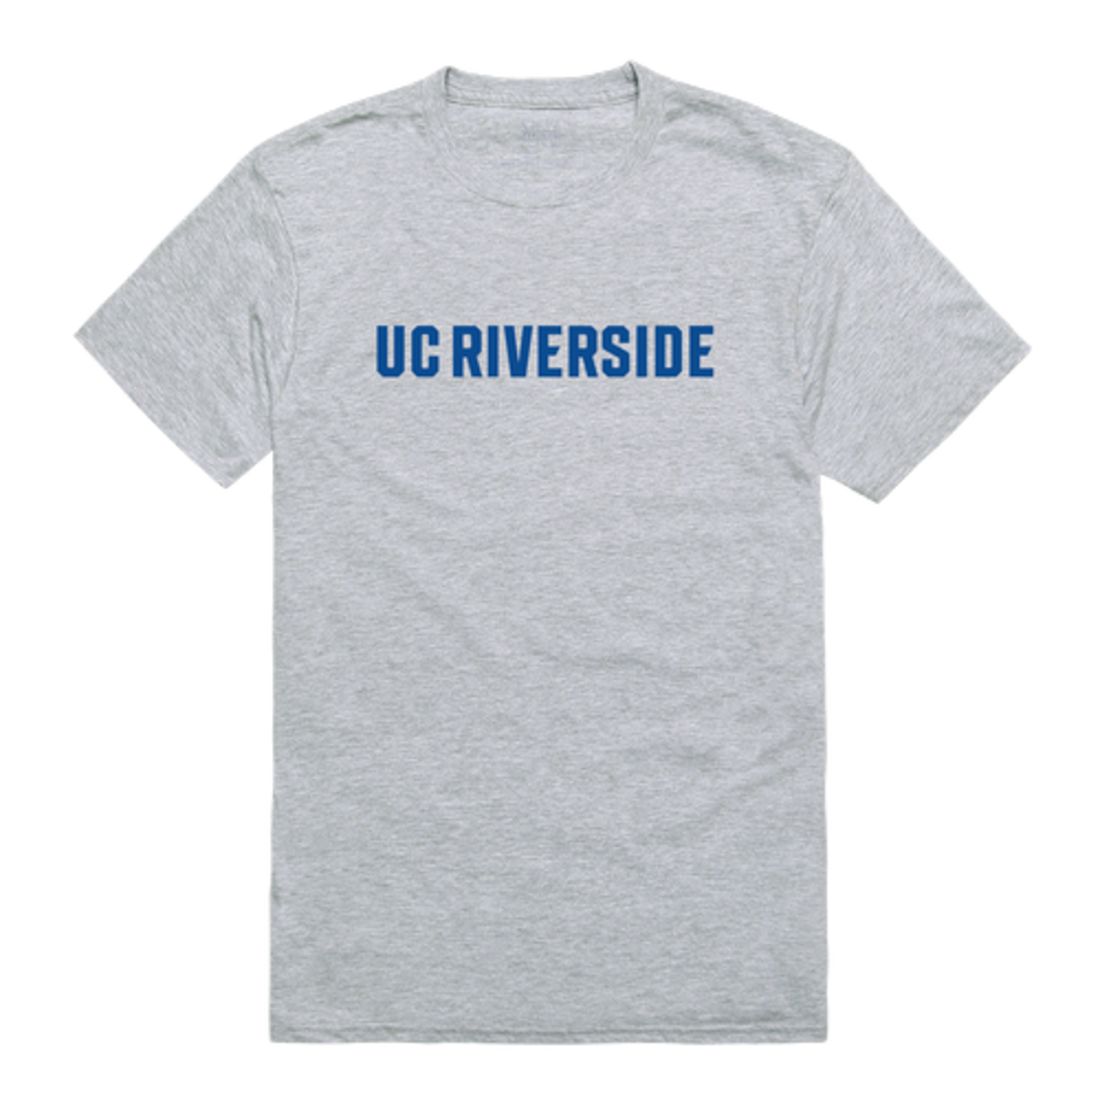 Kingsborough Community College The Wave Game Day T-Shirt